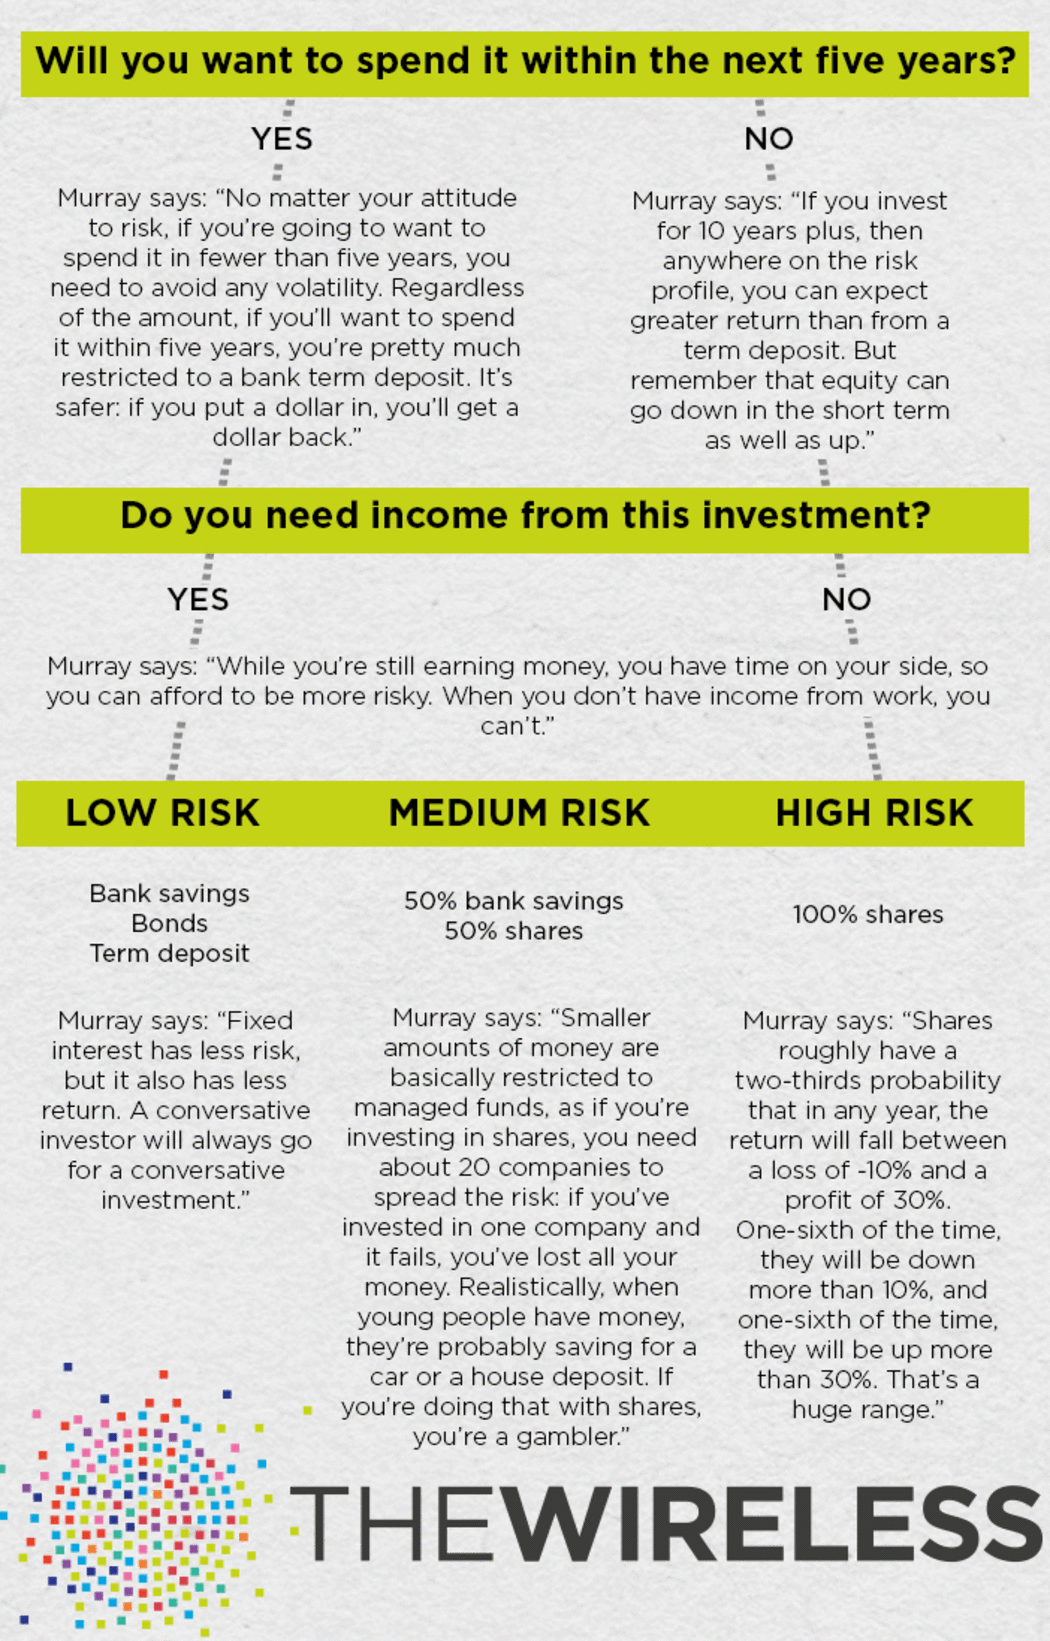 An infographic about investing, including advice about low risk - bank savings, bonds, term deposit - and high risk  - 100% shares - options